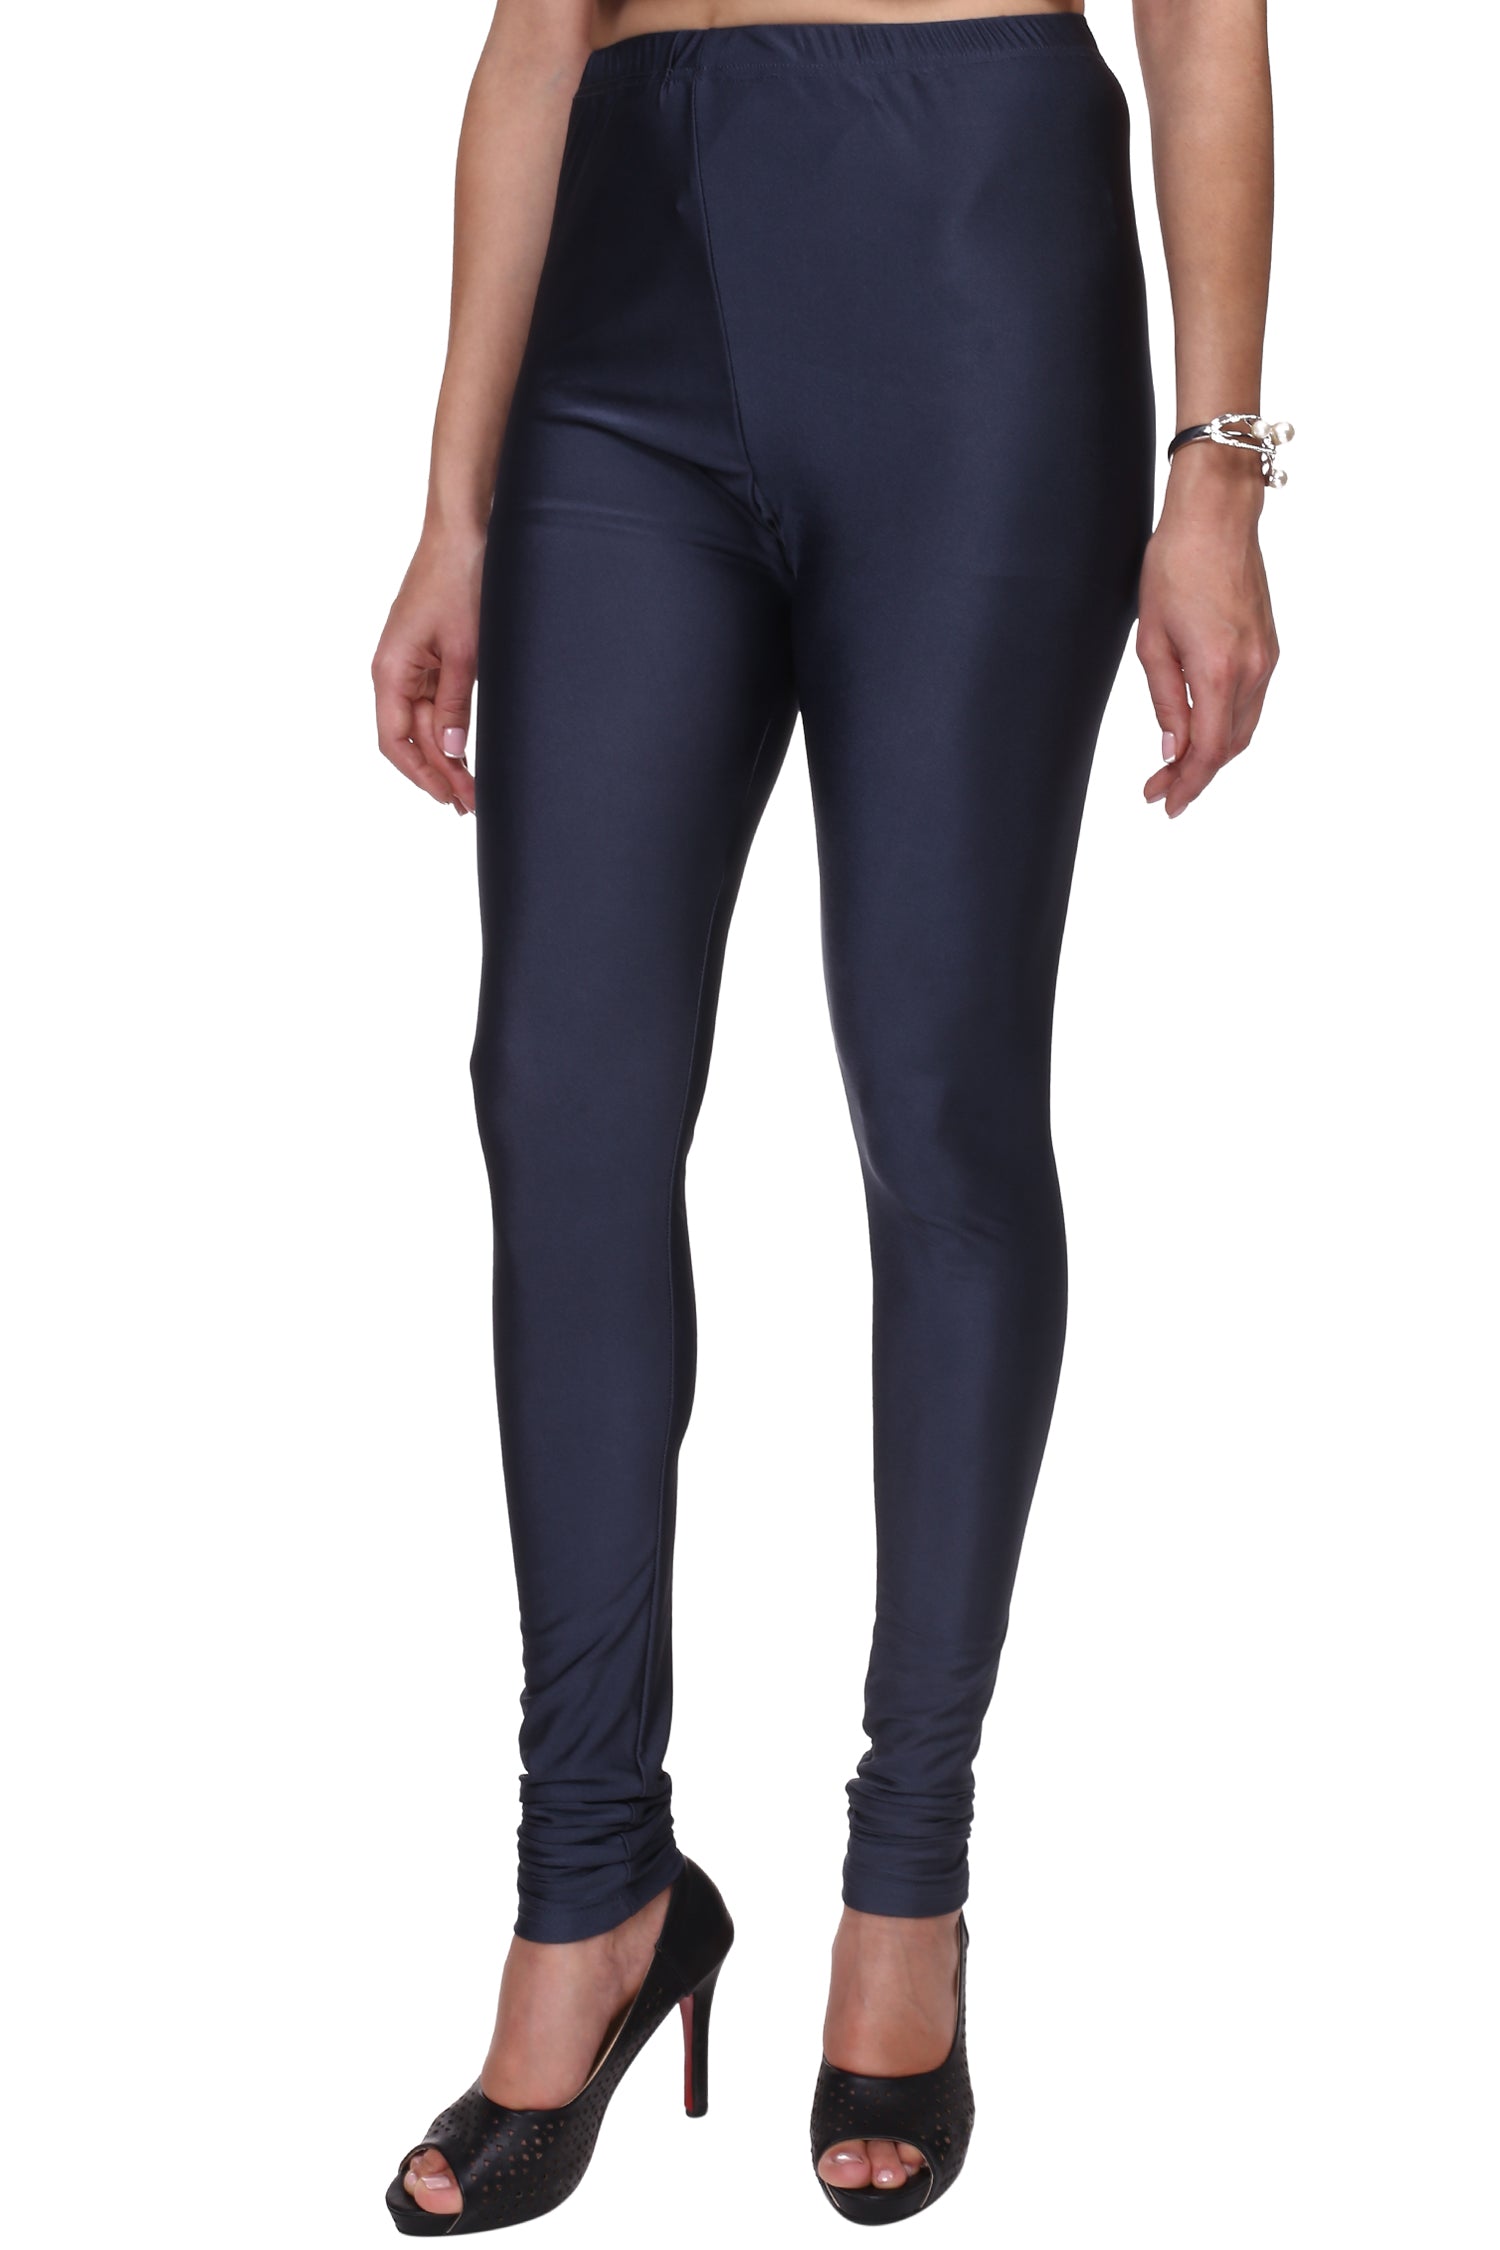 Buy TRASA Ultra Soft Cotton Lycra Solid Regular and Plus Size 21 Colours  Churidar Leggings for Women's and Girls- Sizes :- M, L, XL, 2XL, 3XL, 4XL,  5XL Online at desertcartINDIA